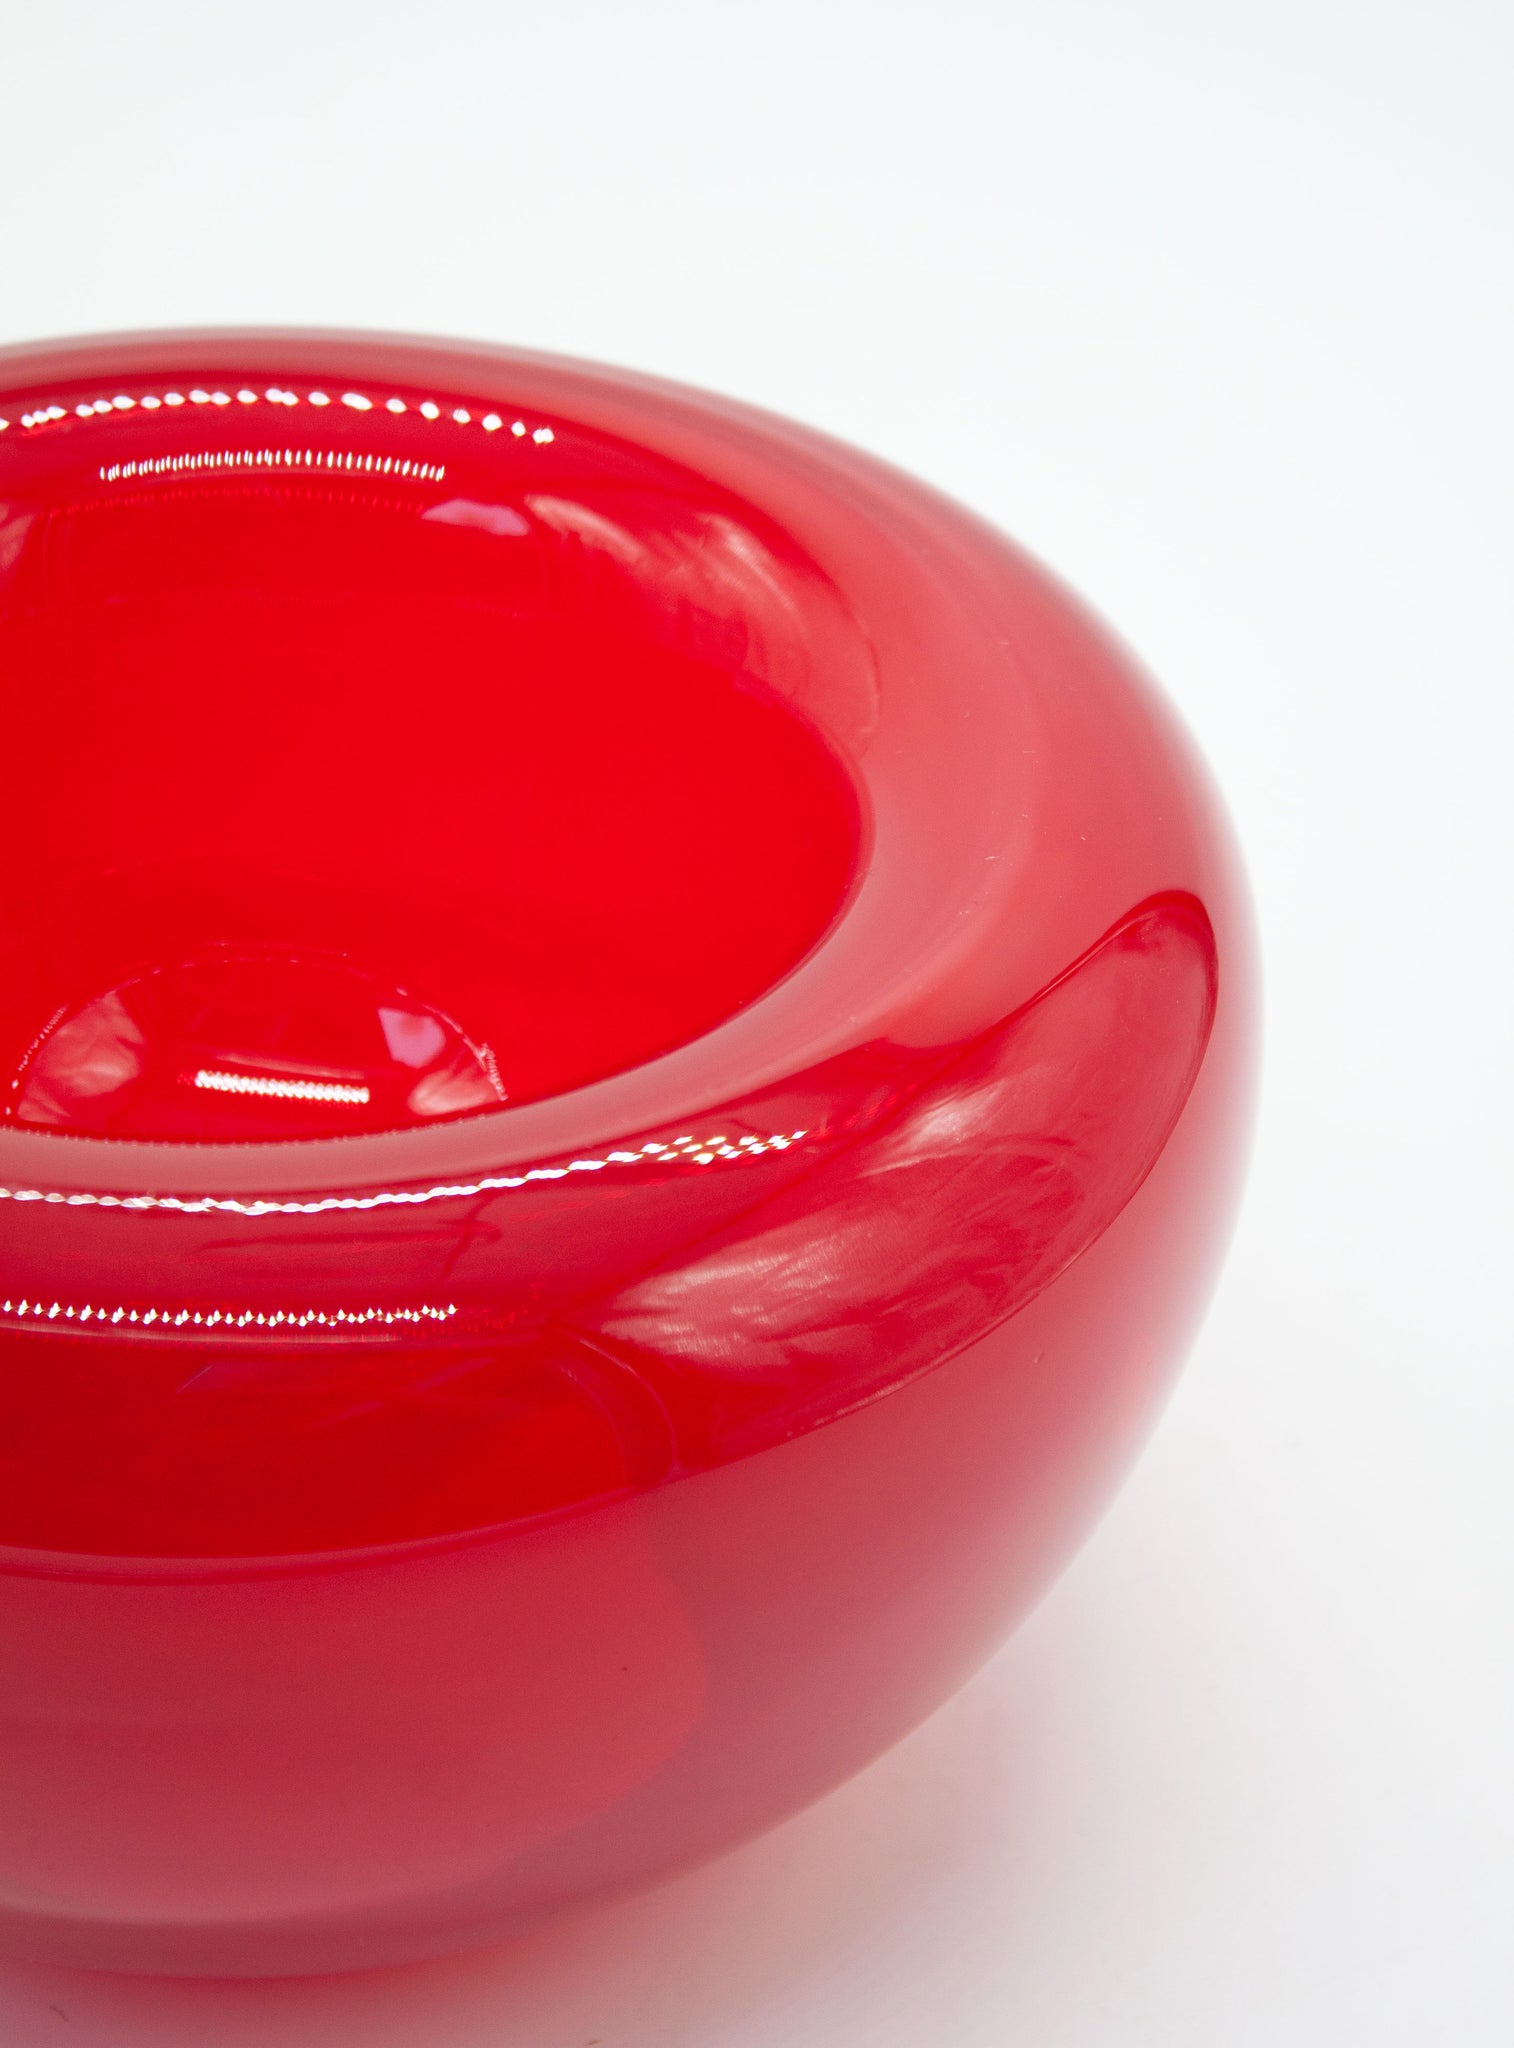 Double Glass Fruit Bowl (Cherry Red)